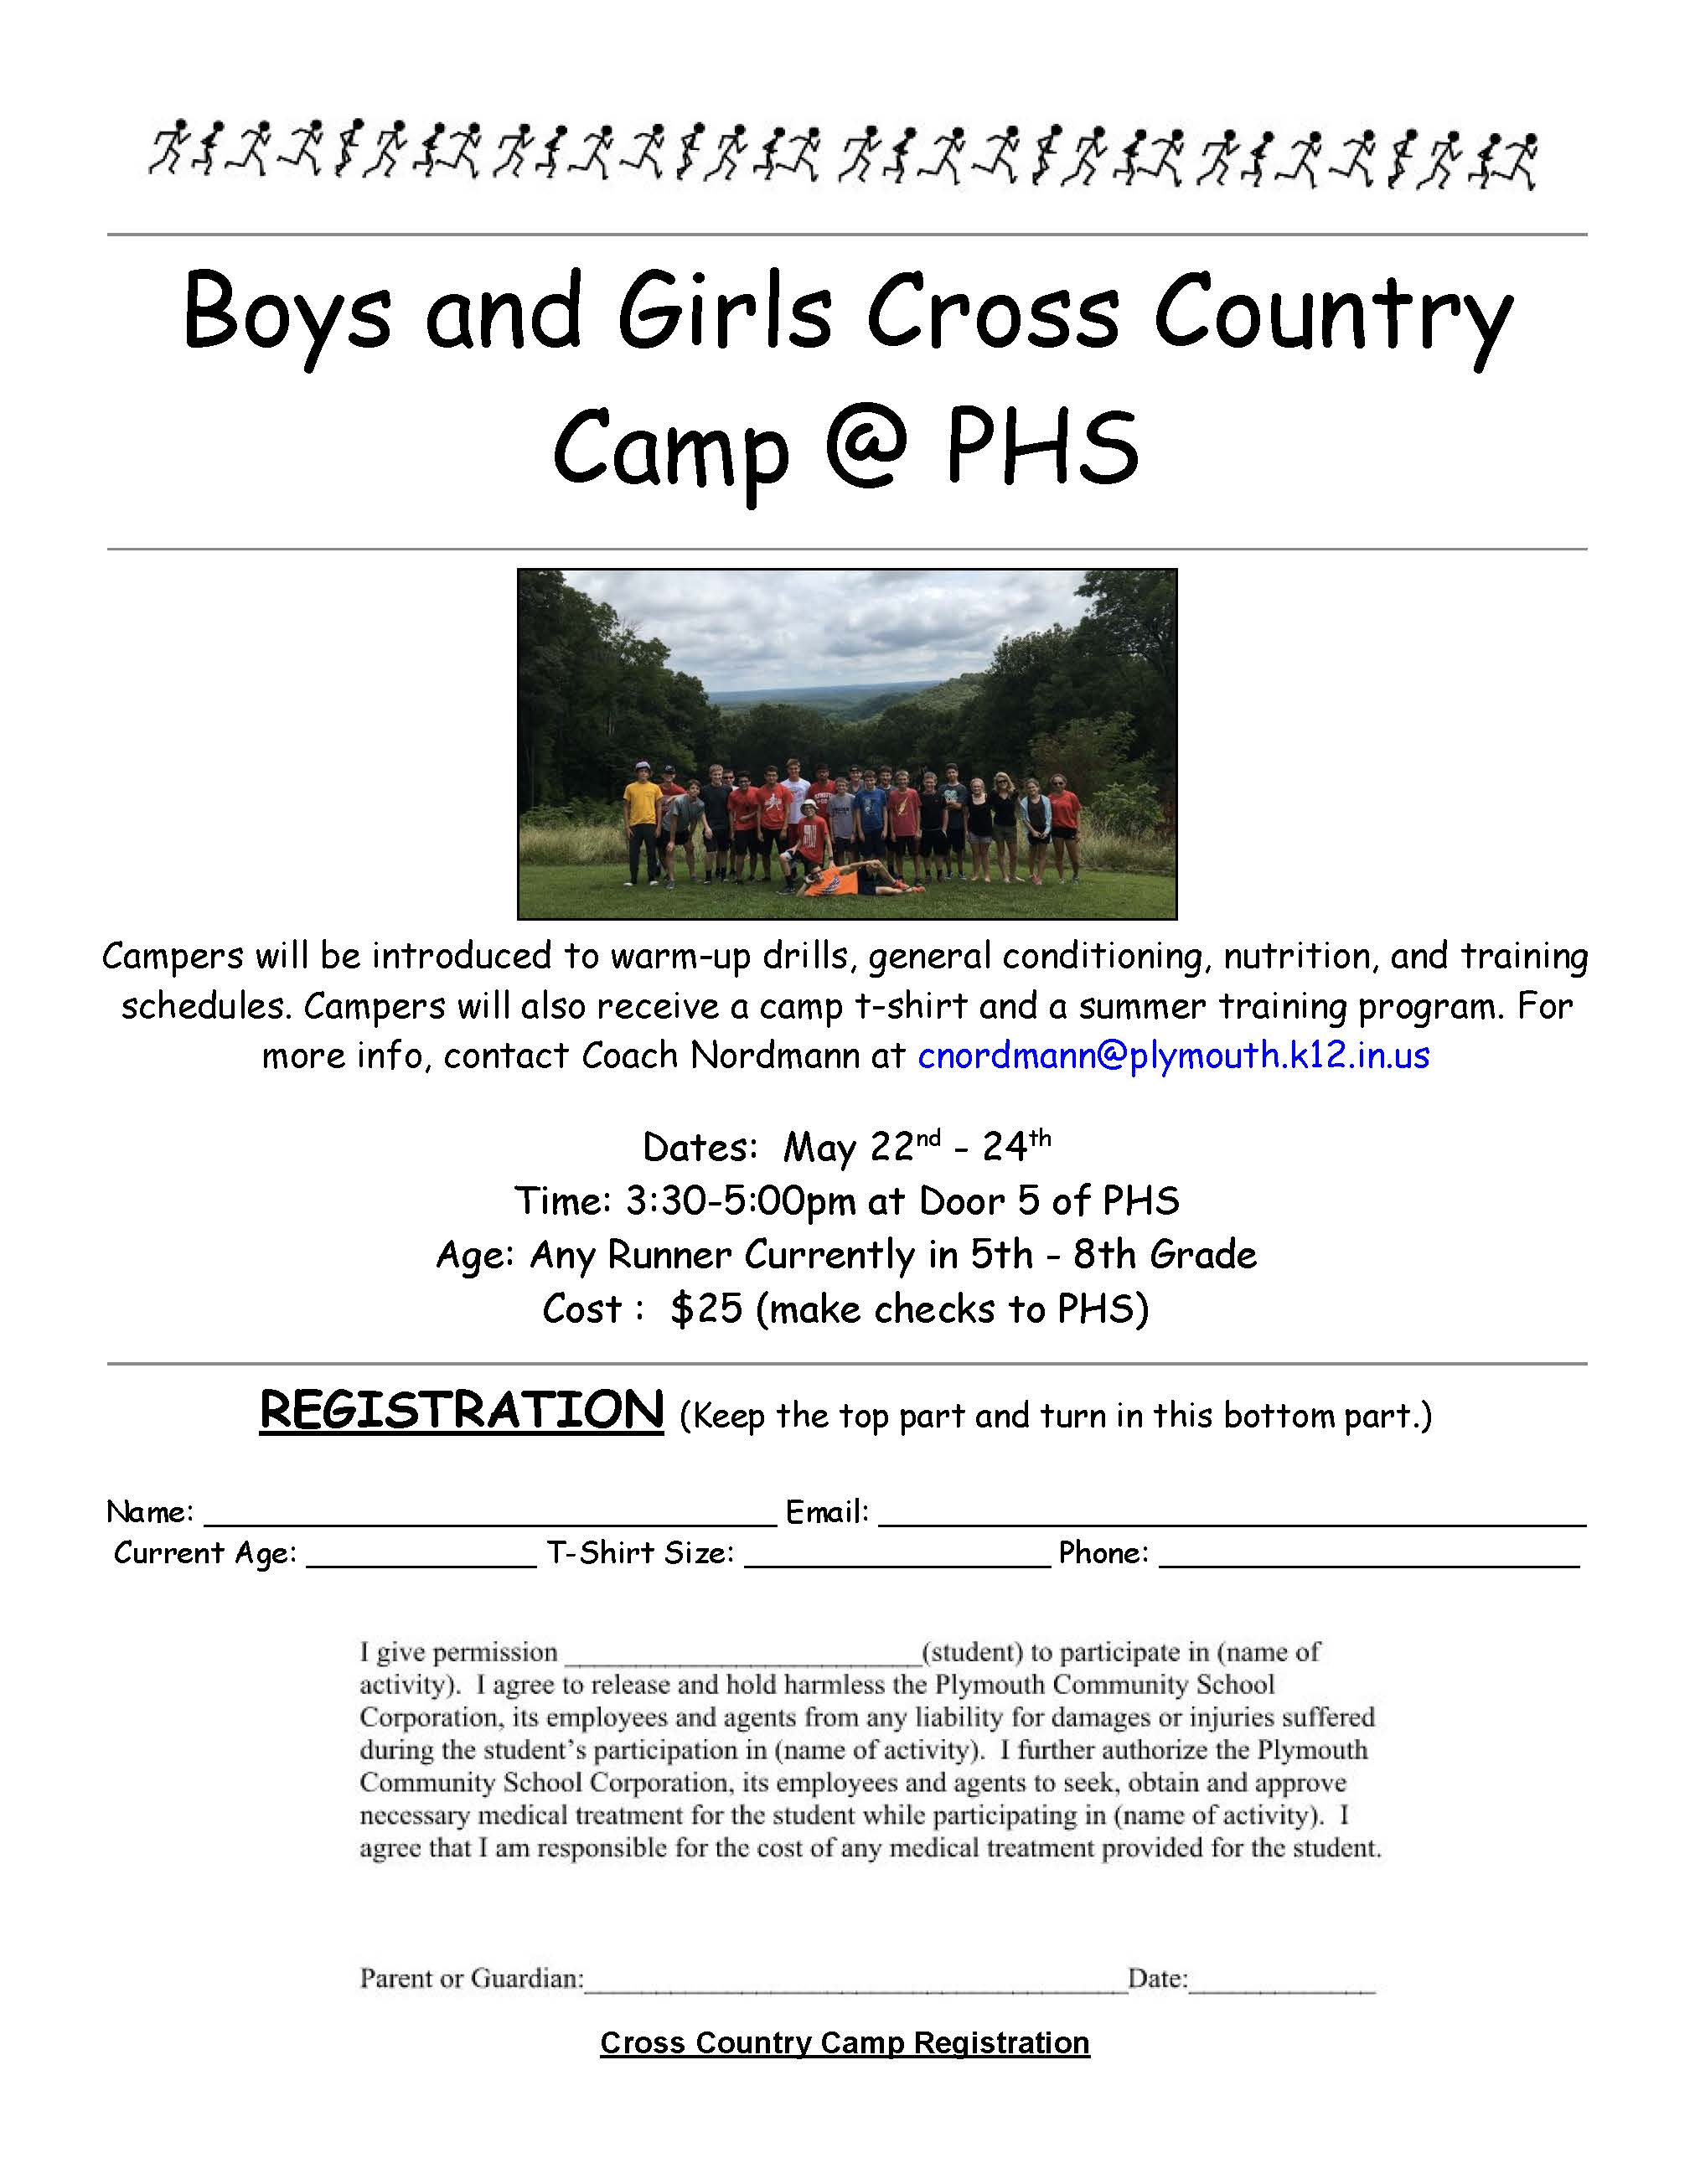 Cross Country Camp Flyer